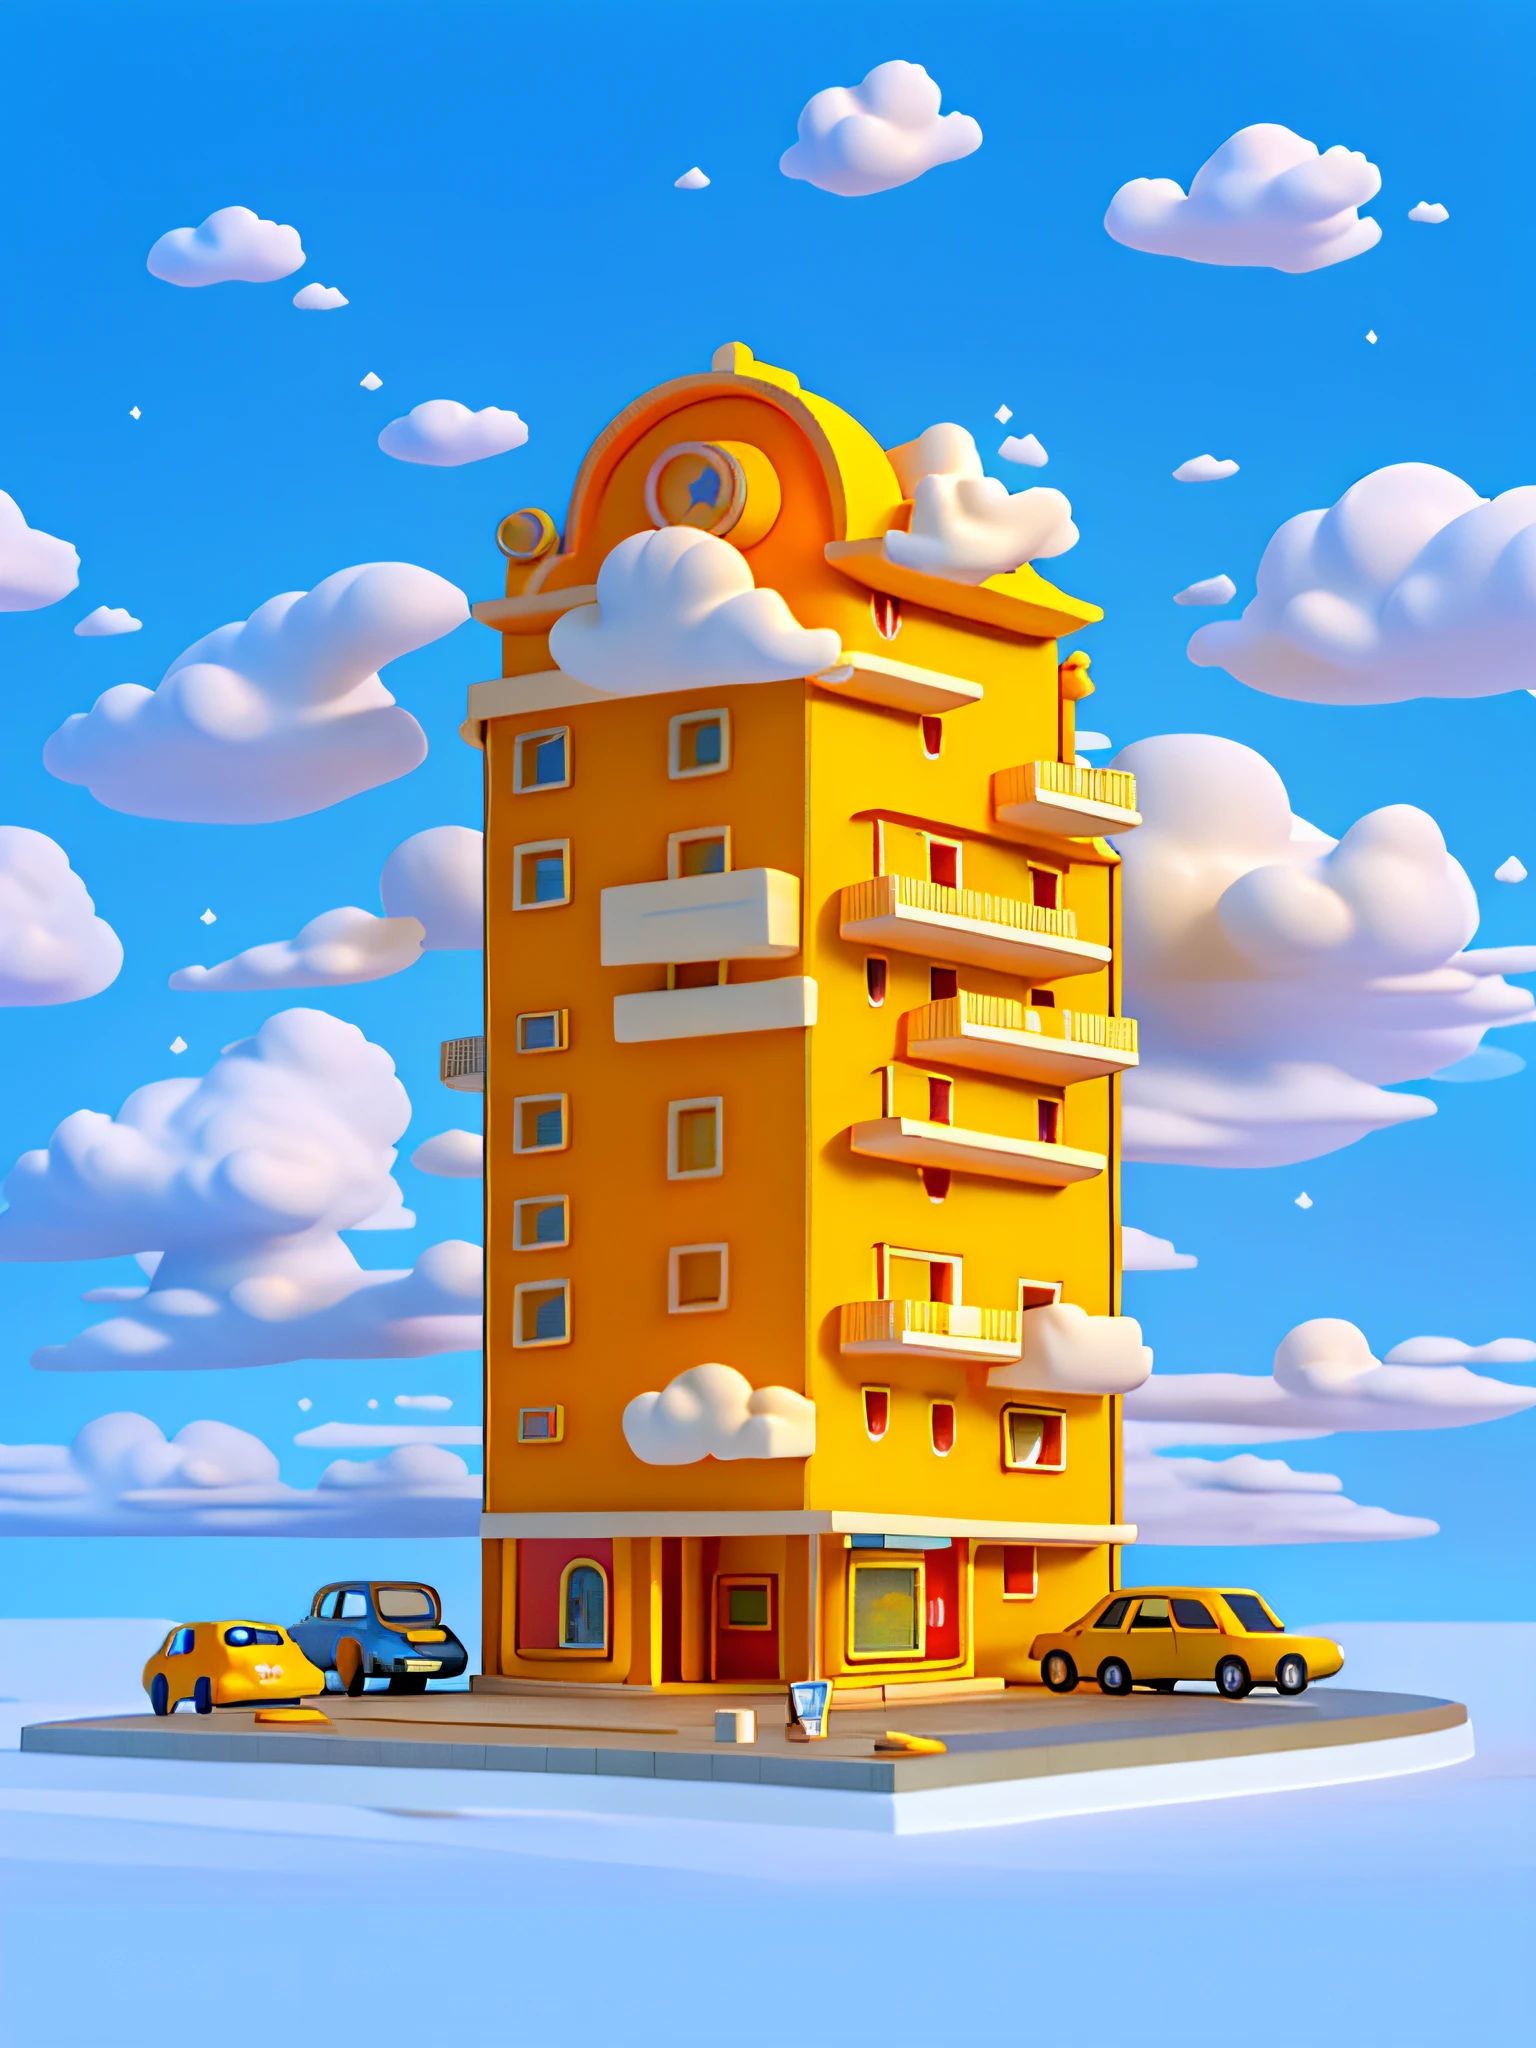 (Masterpiece), (Best Quality), (Ultra Detailed) Simple Cartoon Hotel Building, Hotel Low-rise Building, Toy Model, Clouds, Cars, Top View, Clean Background, Pale Yellow and Pale Orange Buildings,